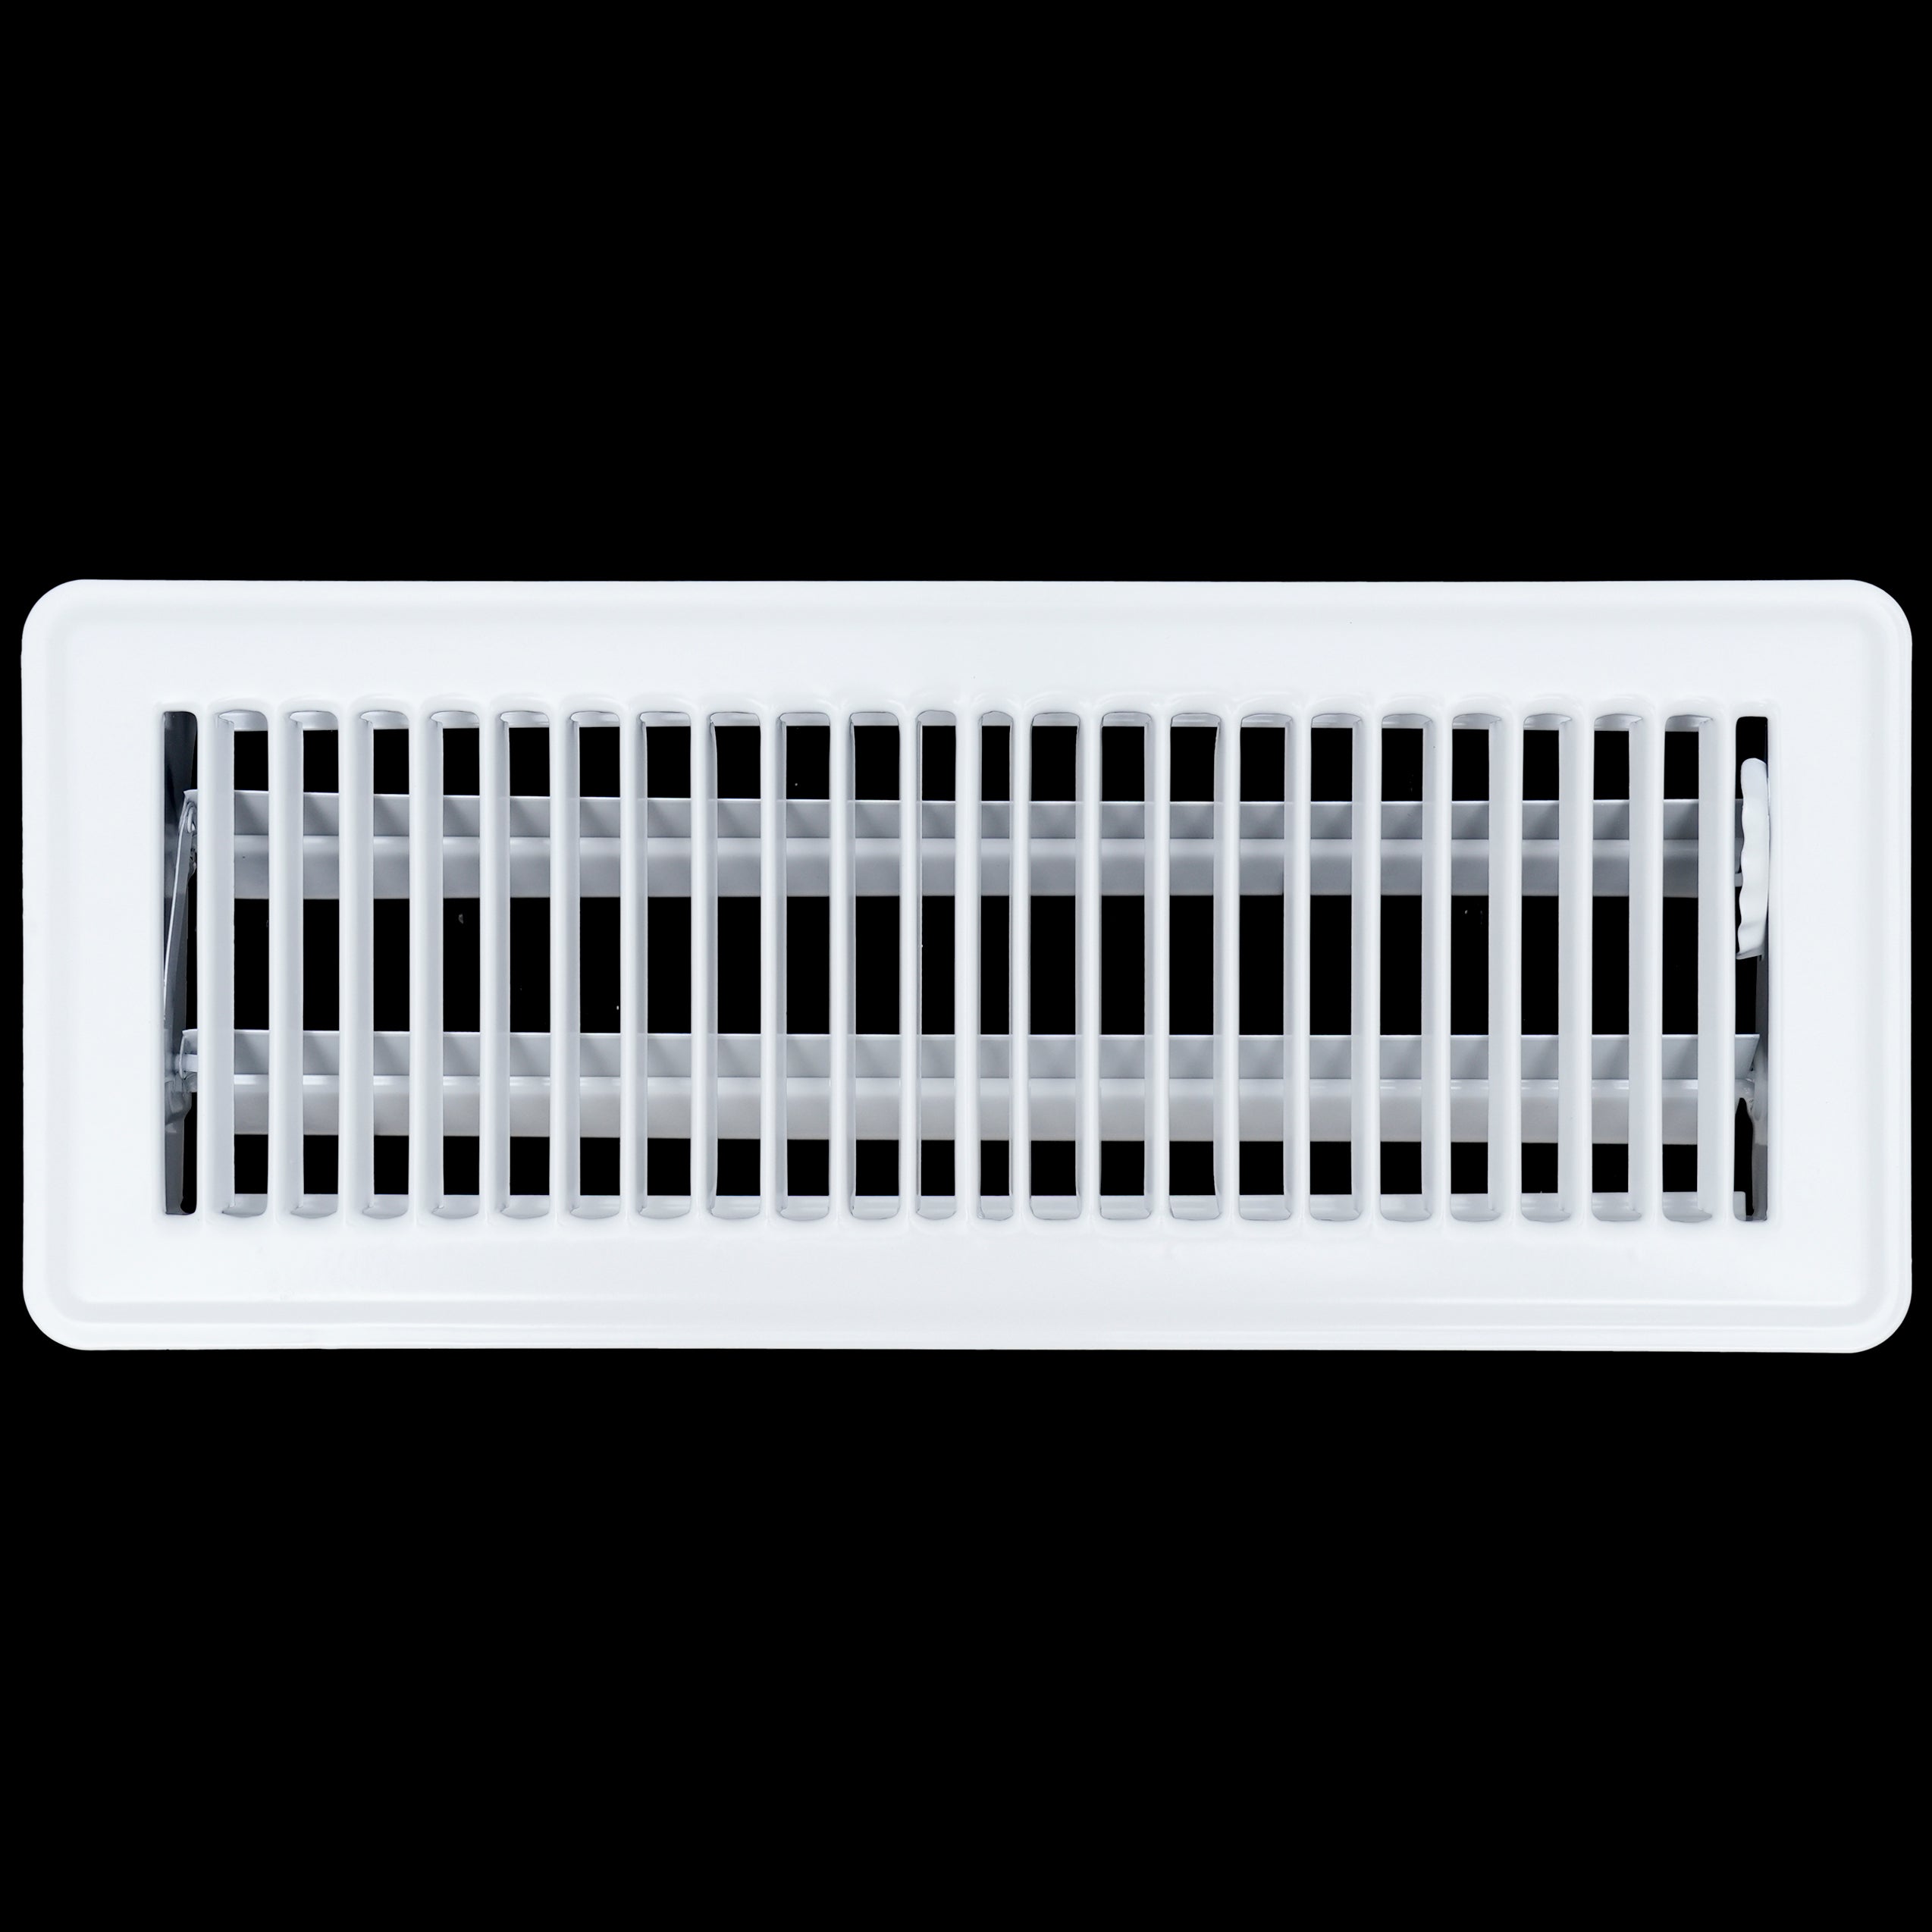 airgrilles 4" x 12" floor register with louvered design heavy duty walkable design with damper floor vent grille easy to adjust air supply lever white hnd-flg-wh-4x12  1